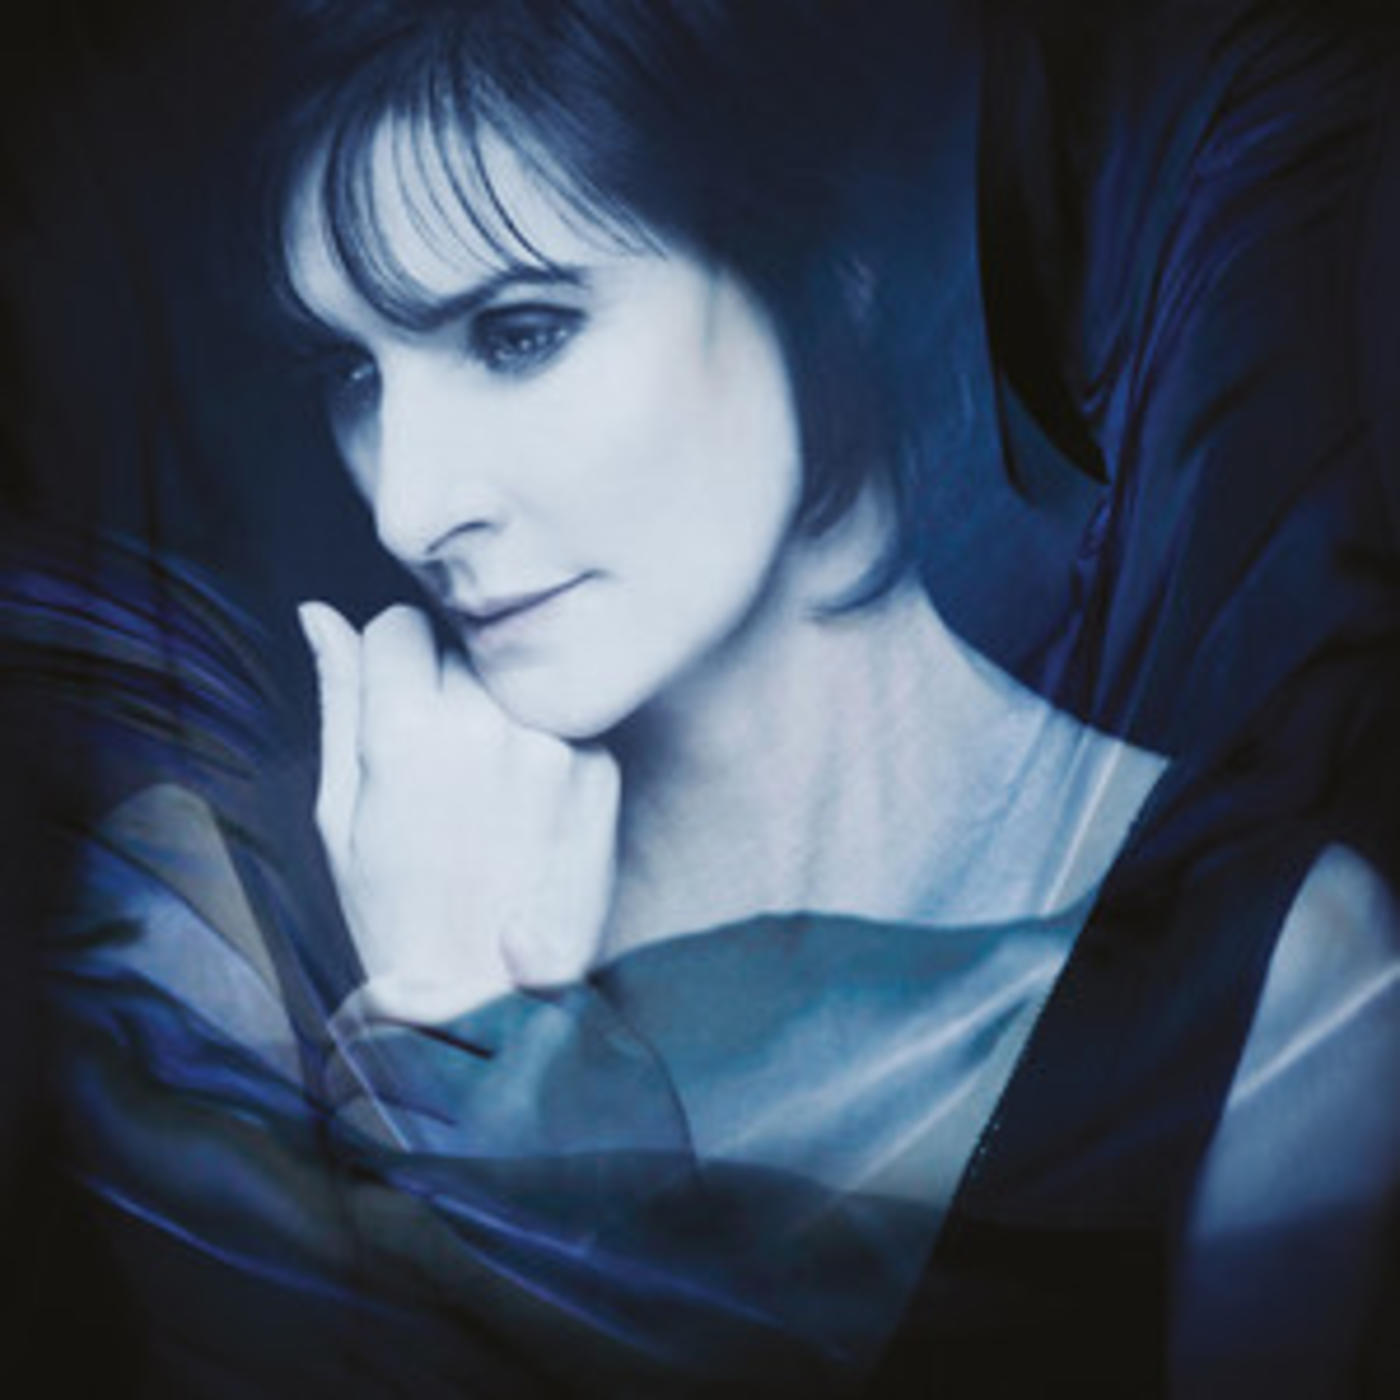 Enya - Official Playlist - Orinoco Flow, Only Time, Wild Child, Caribbean Blue, May It Be